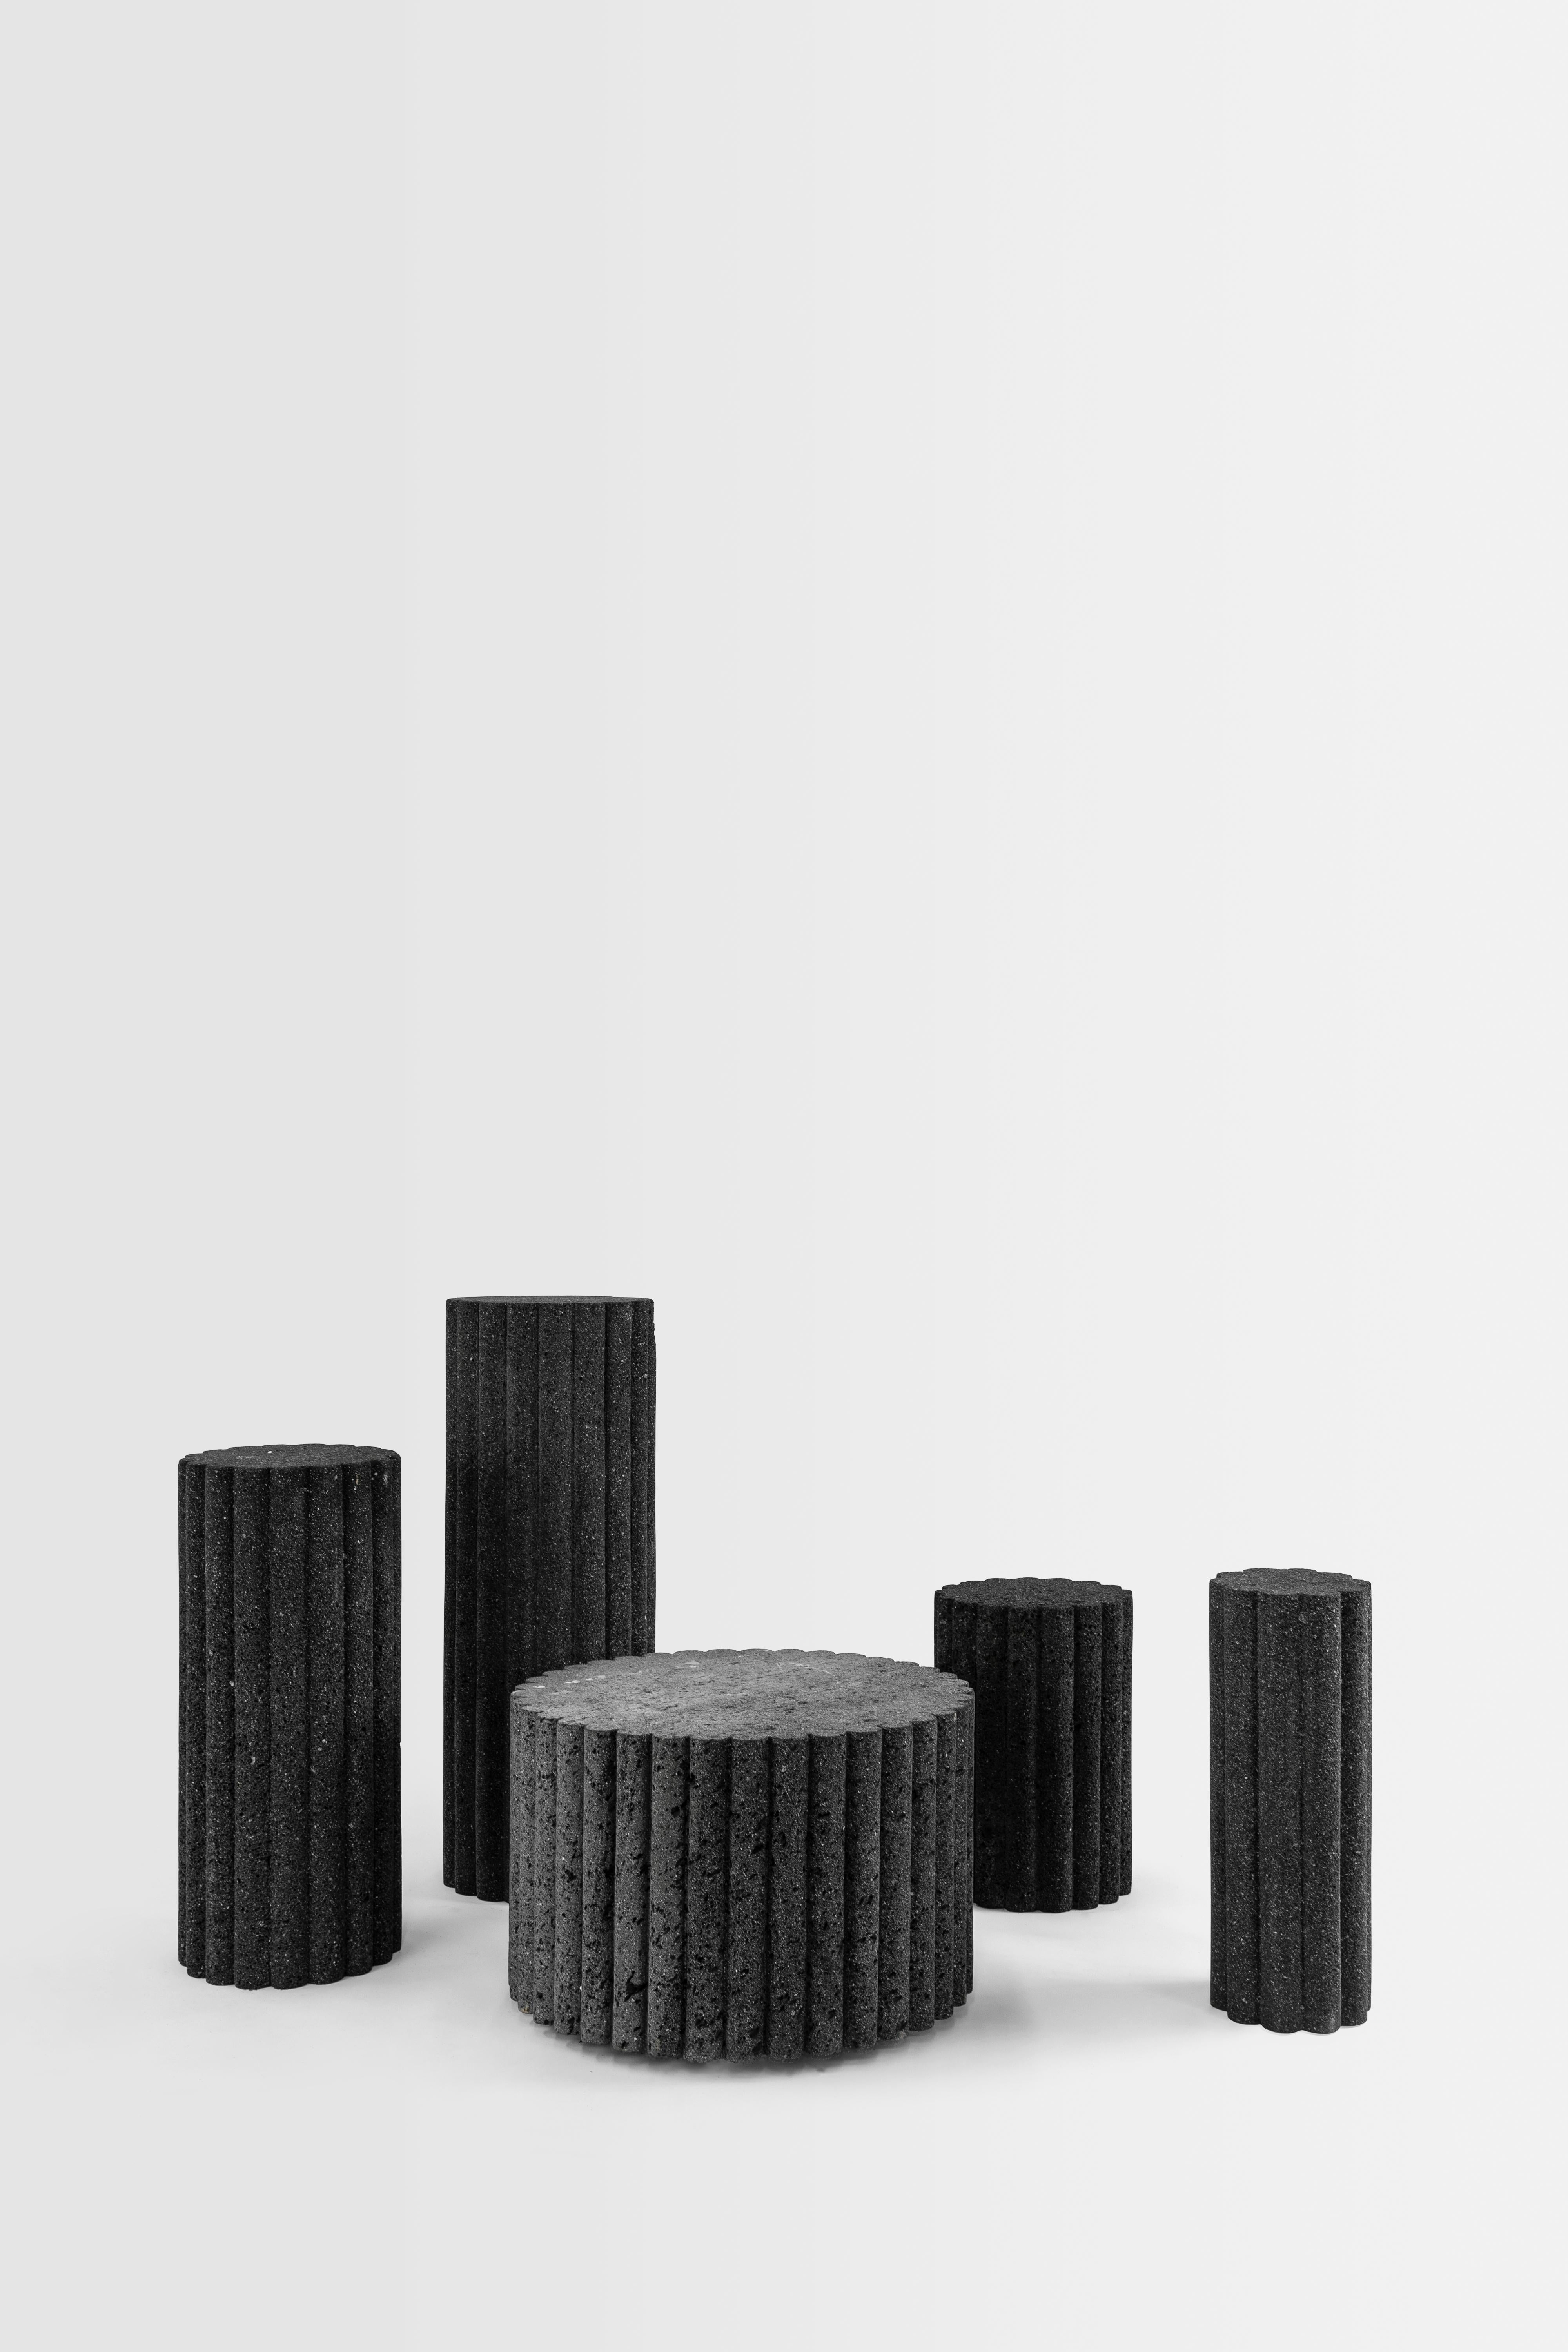 The LOTO ROCA TOTEMS are exploration personified. These volcanic stone monoliths have been carved mastering a meditative process with chisel and hammer. Two totems rise to different heights recalling the esthetic character of the LOTO ROCA family as